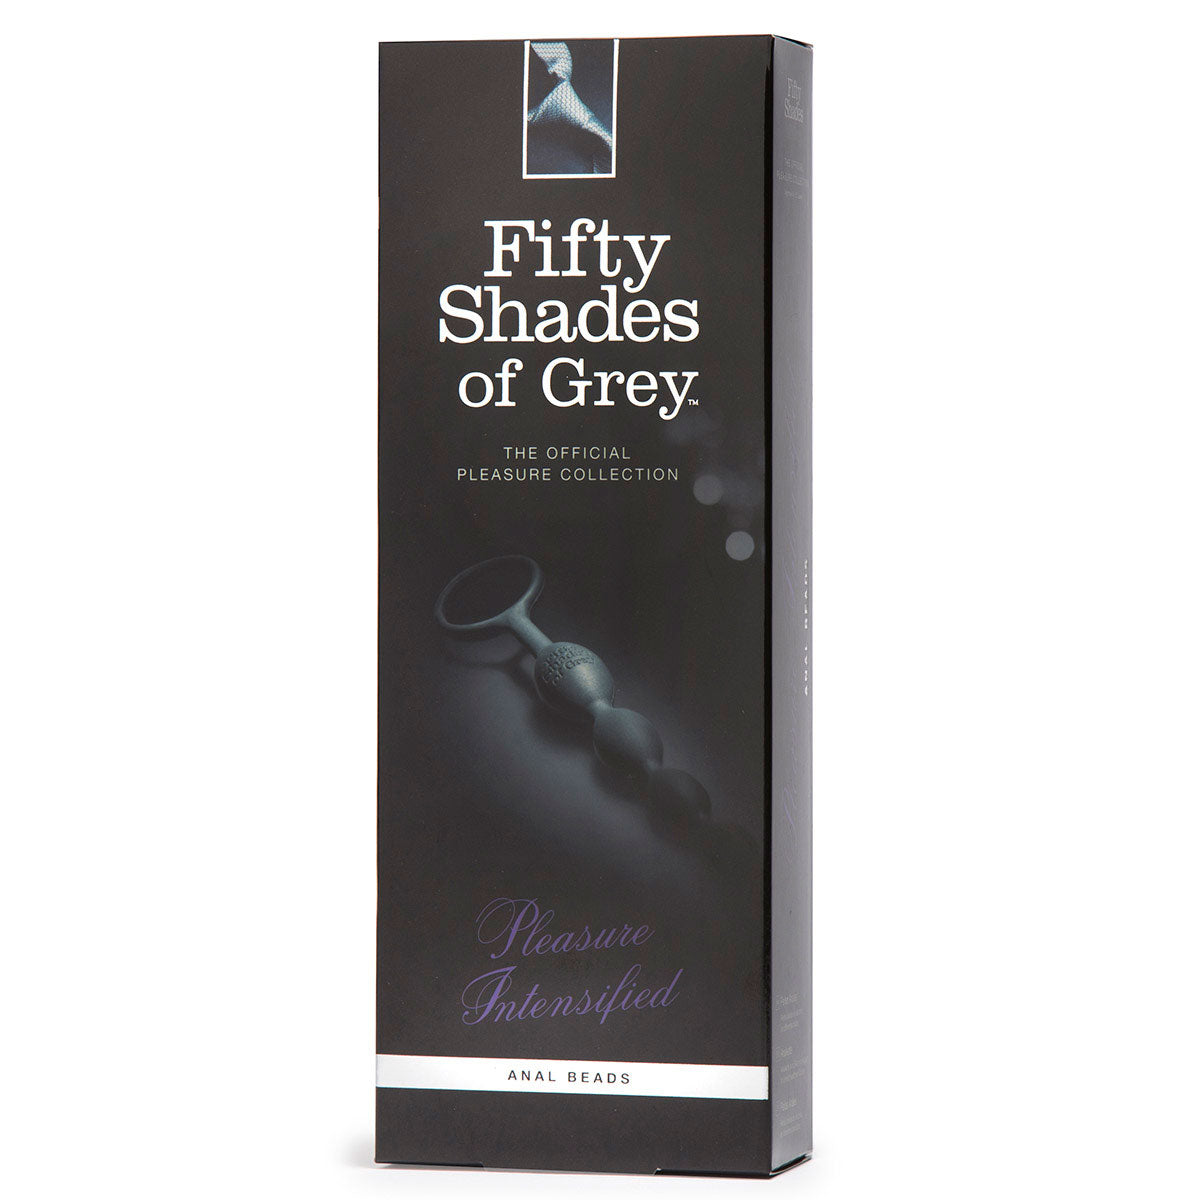 Fifty Shades - Pleasure Intensified Anal Beads Intimates Adult Boutique